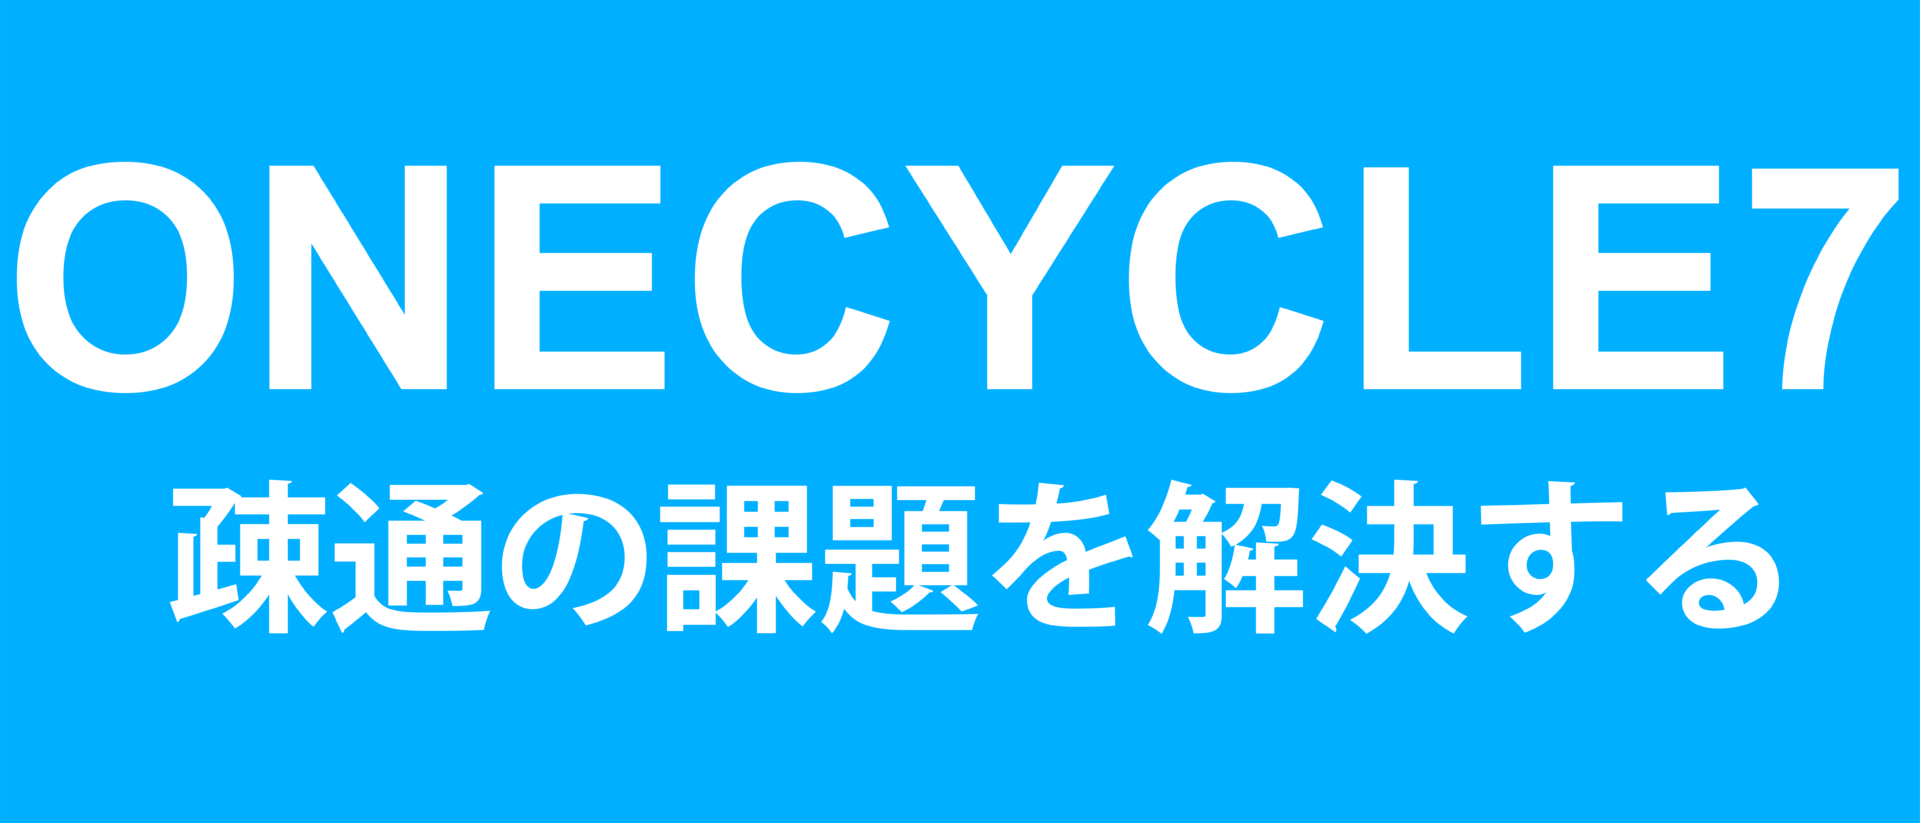 ONECYCLE7